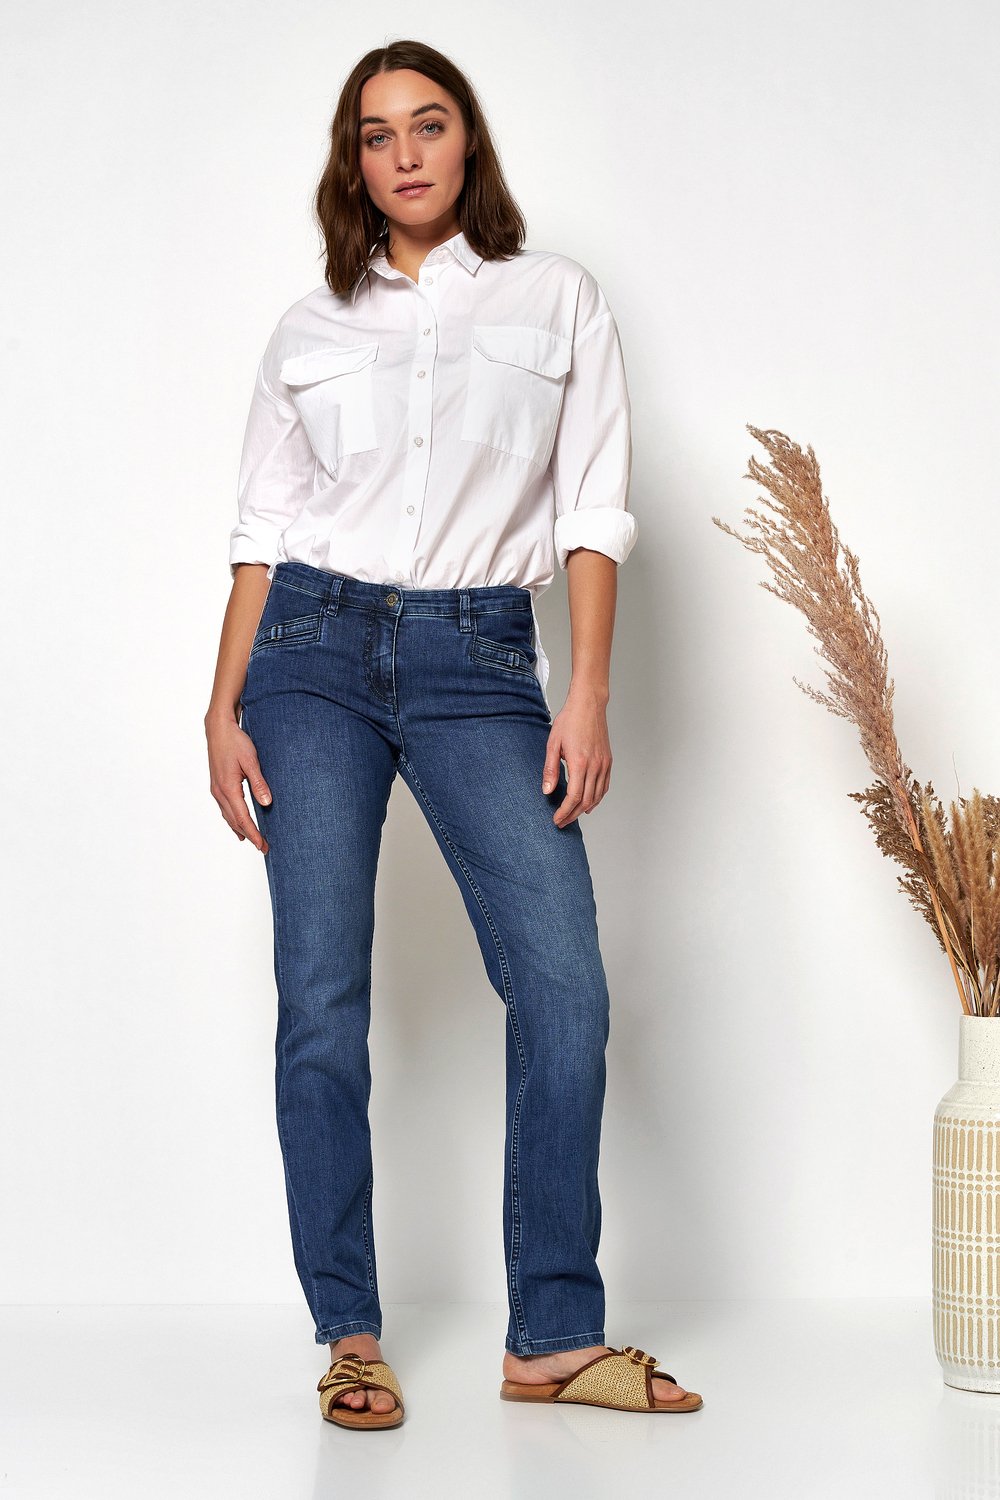 Jeans with pocket buckles | Style »Perfect Shape« dark blue